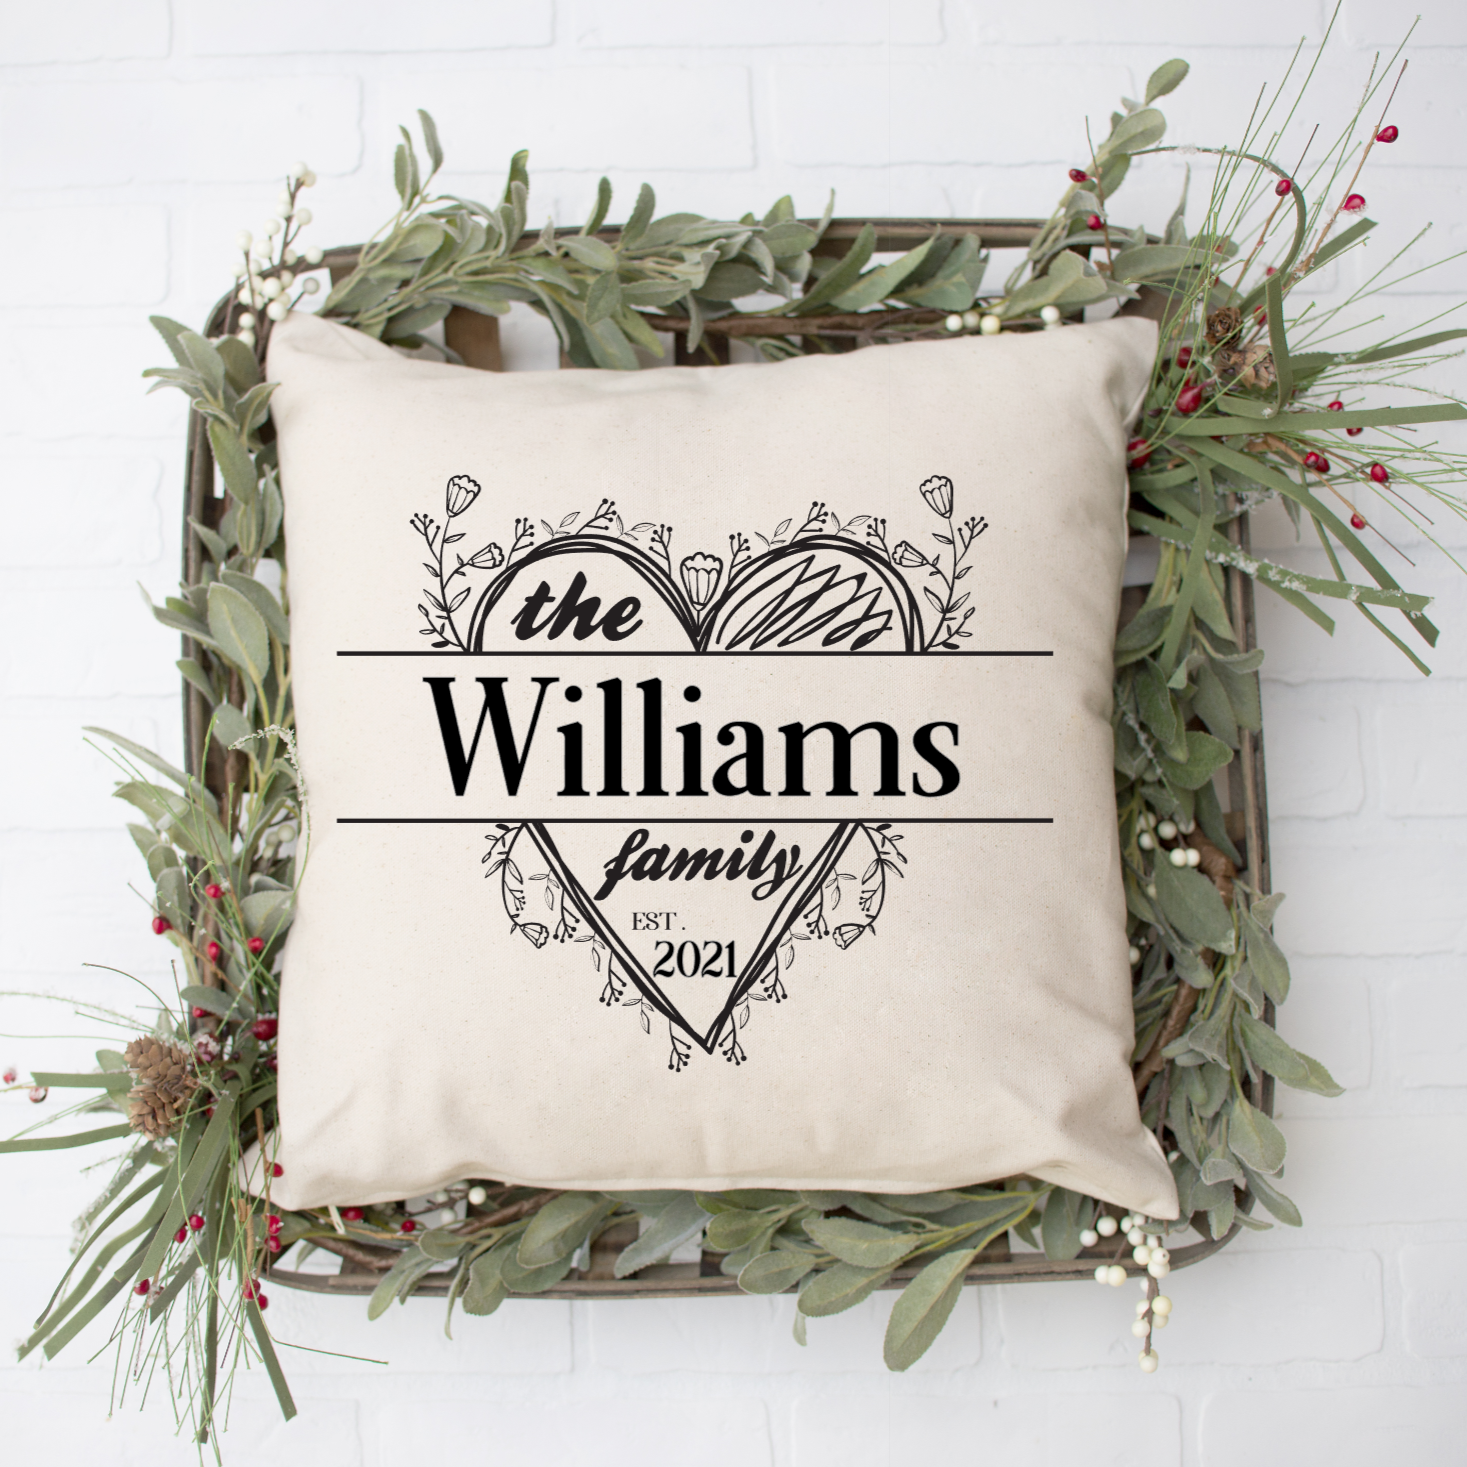 Pillow Throw Cover Family name and Est Date